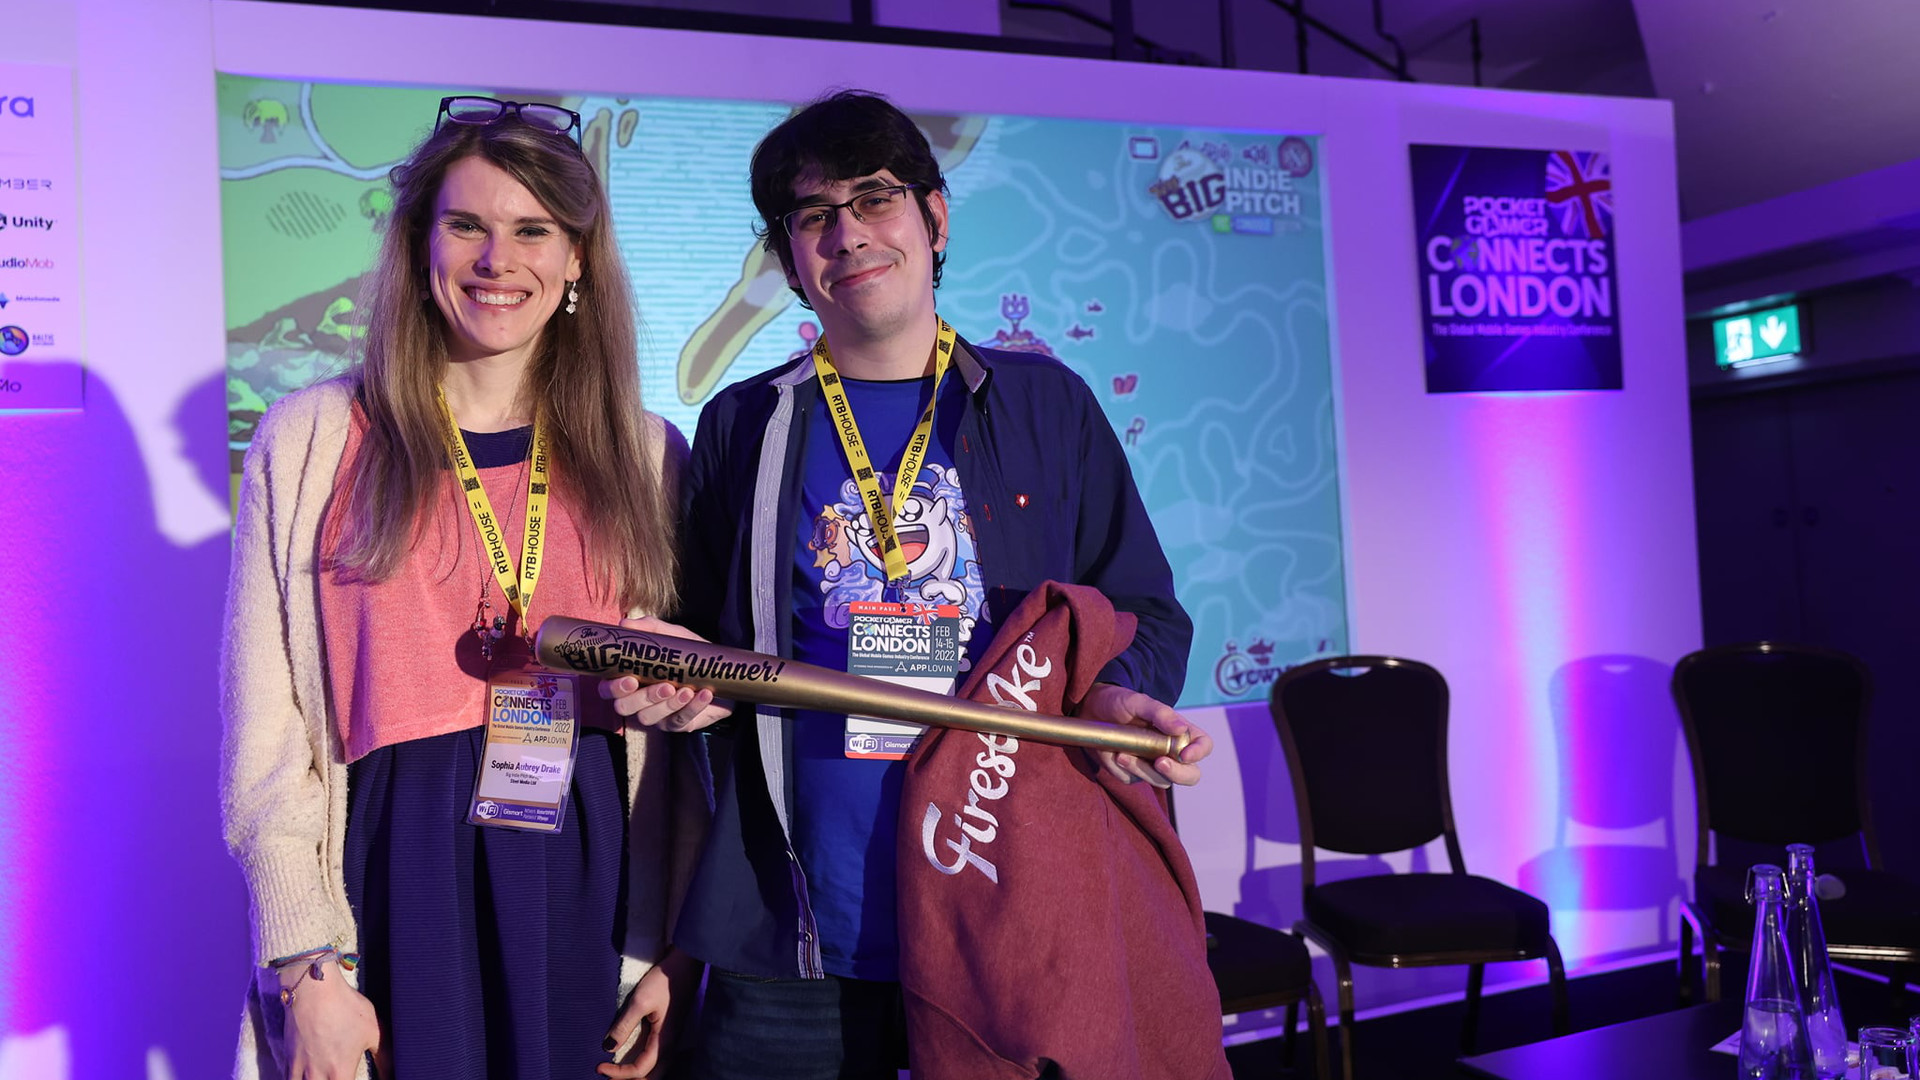 Photo of Jorge receiving the Big Indie Pitch Golden Bat awarded by Sophia Aubrey Drake at PocketGamer Connects London 2022